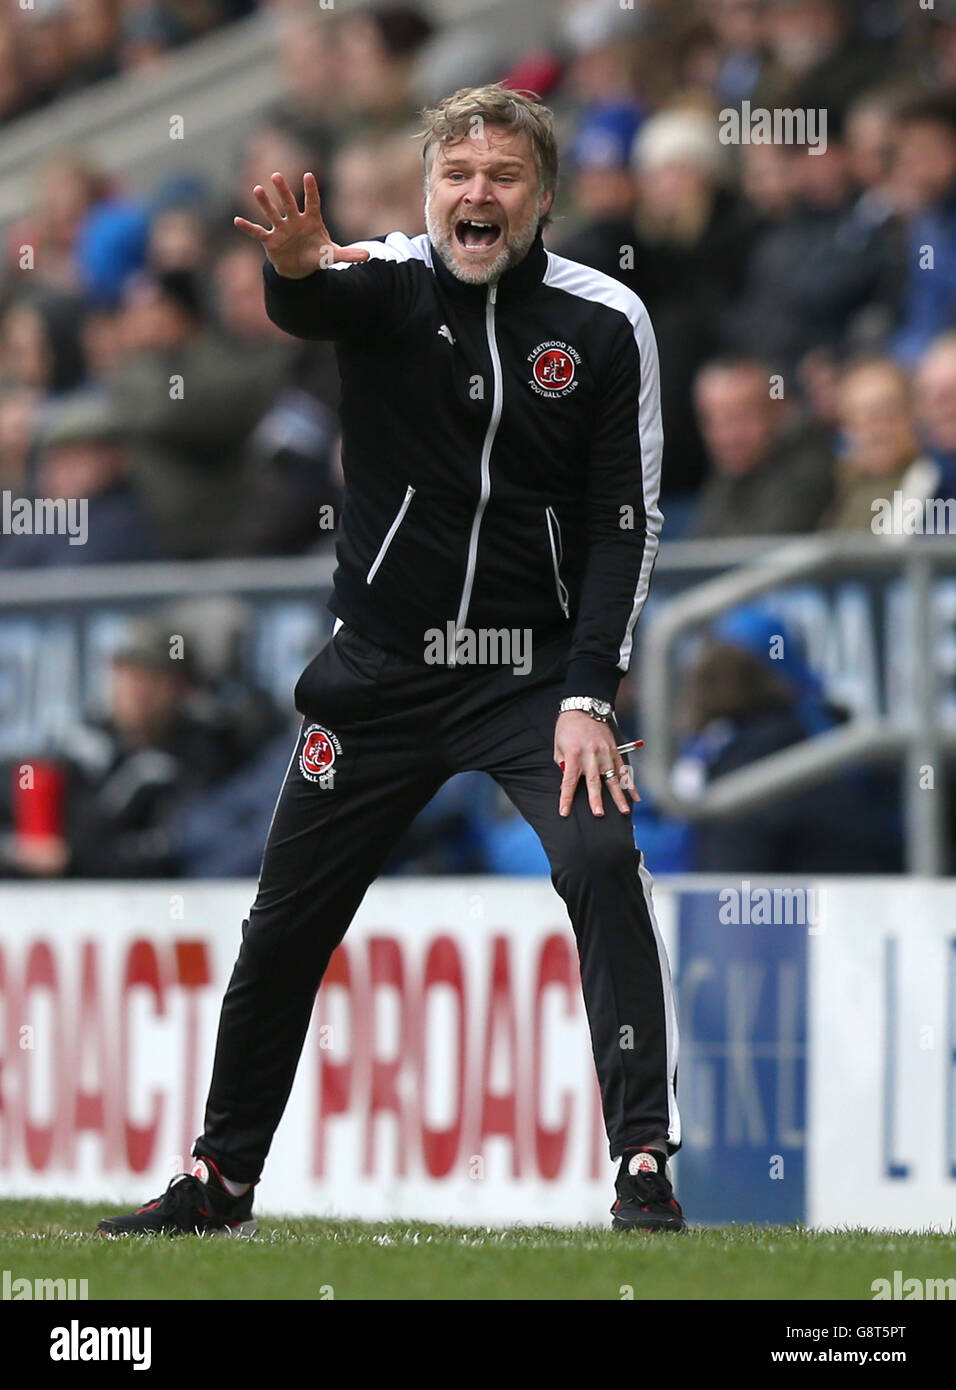 Chesterfield v Fleetwood Town - Sky Bet League One - Proact Stadium. Fleetwood Town manager Steven Pressley gestures on the touchline Stock Photo